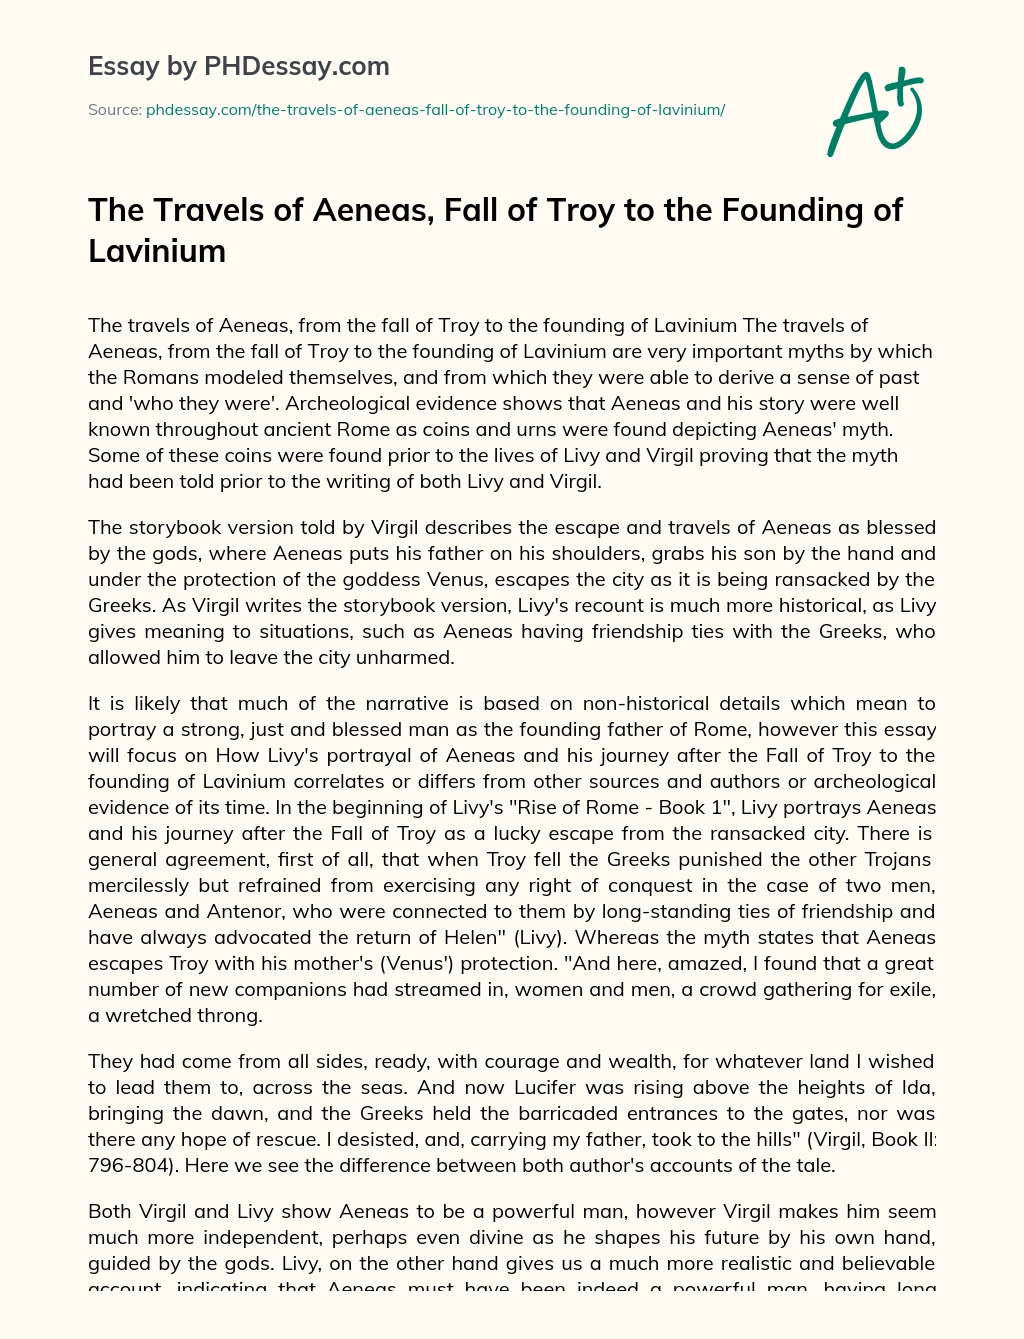 The Travels of Aeneas, Fall of Troy to the Founding of Lavinium essay